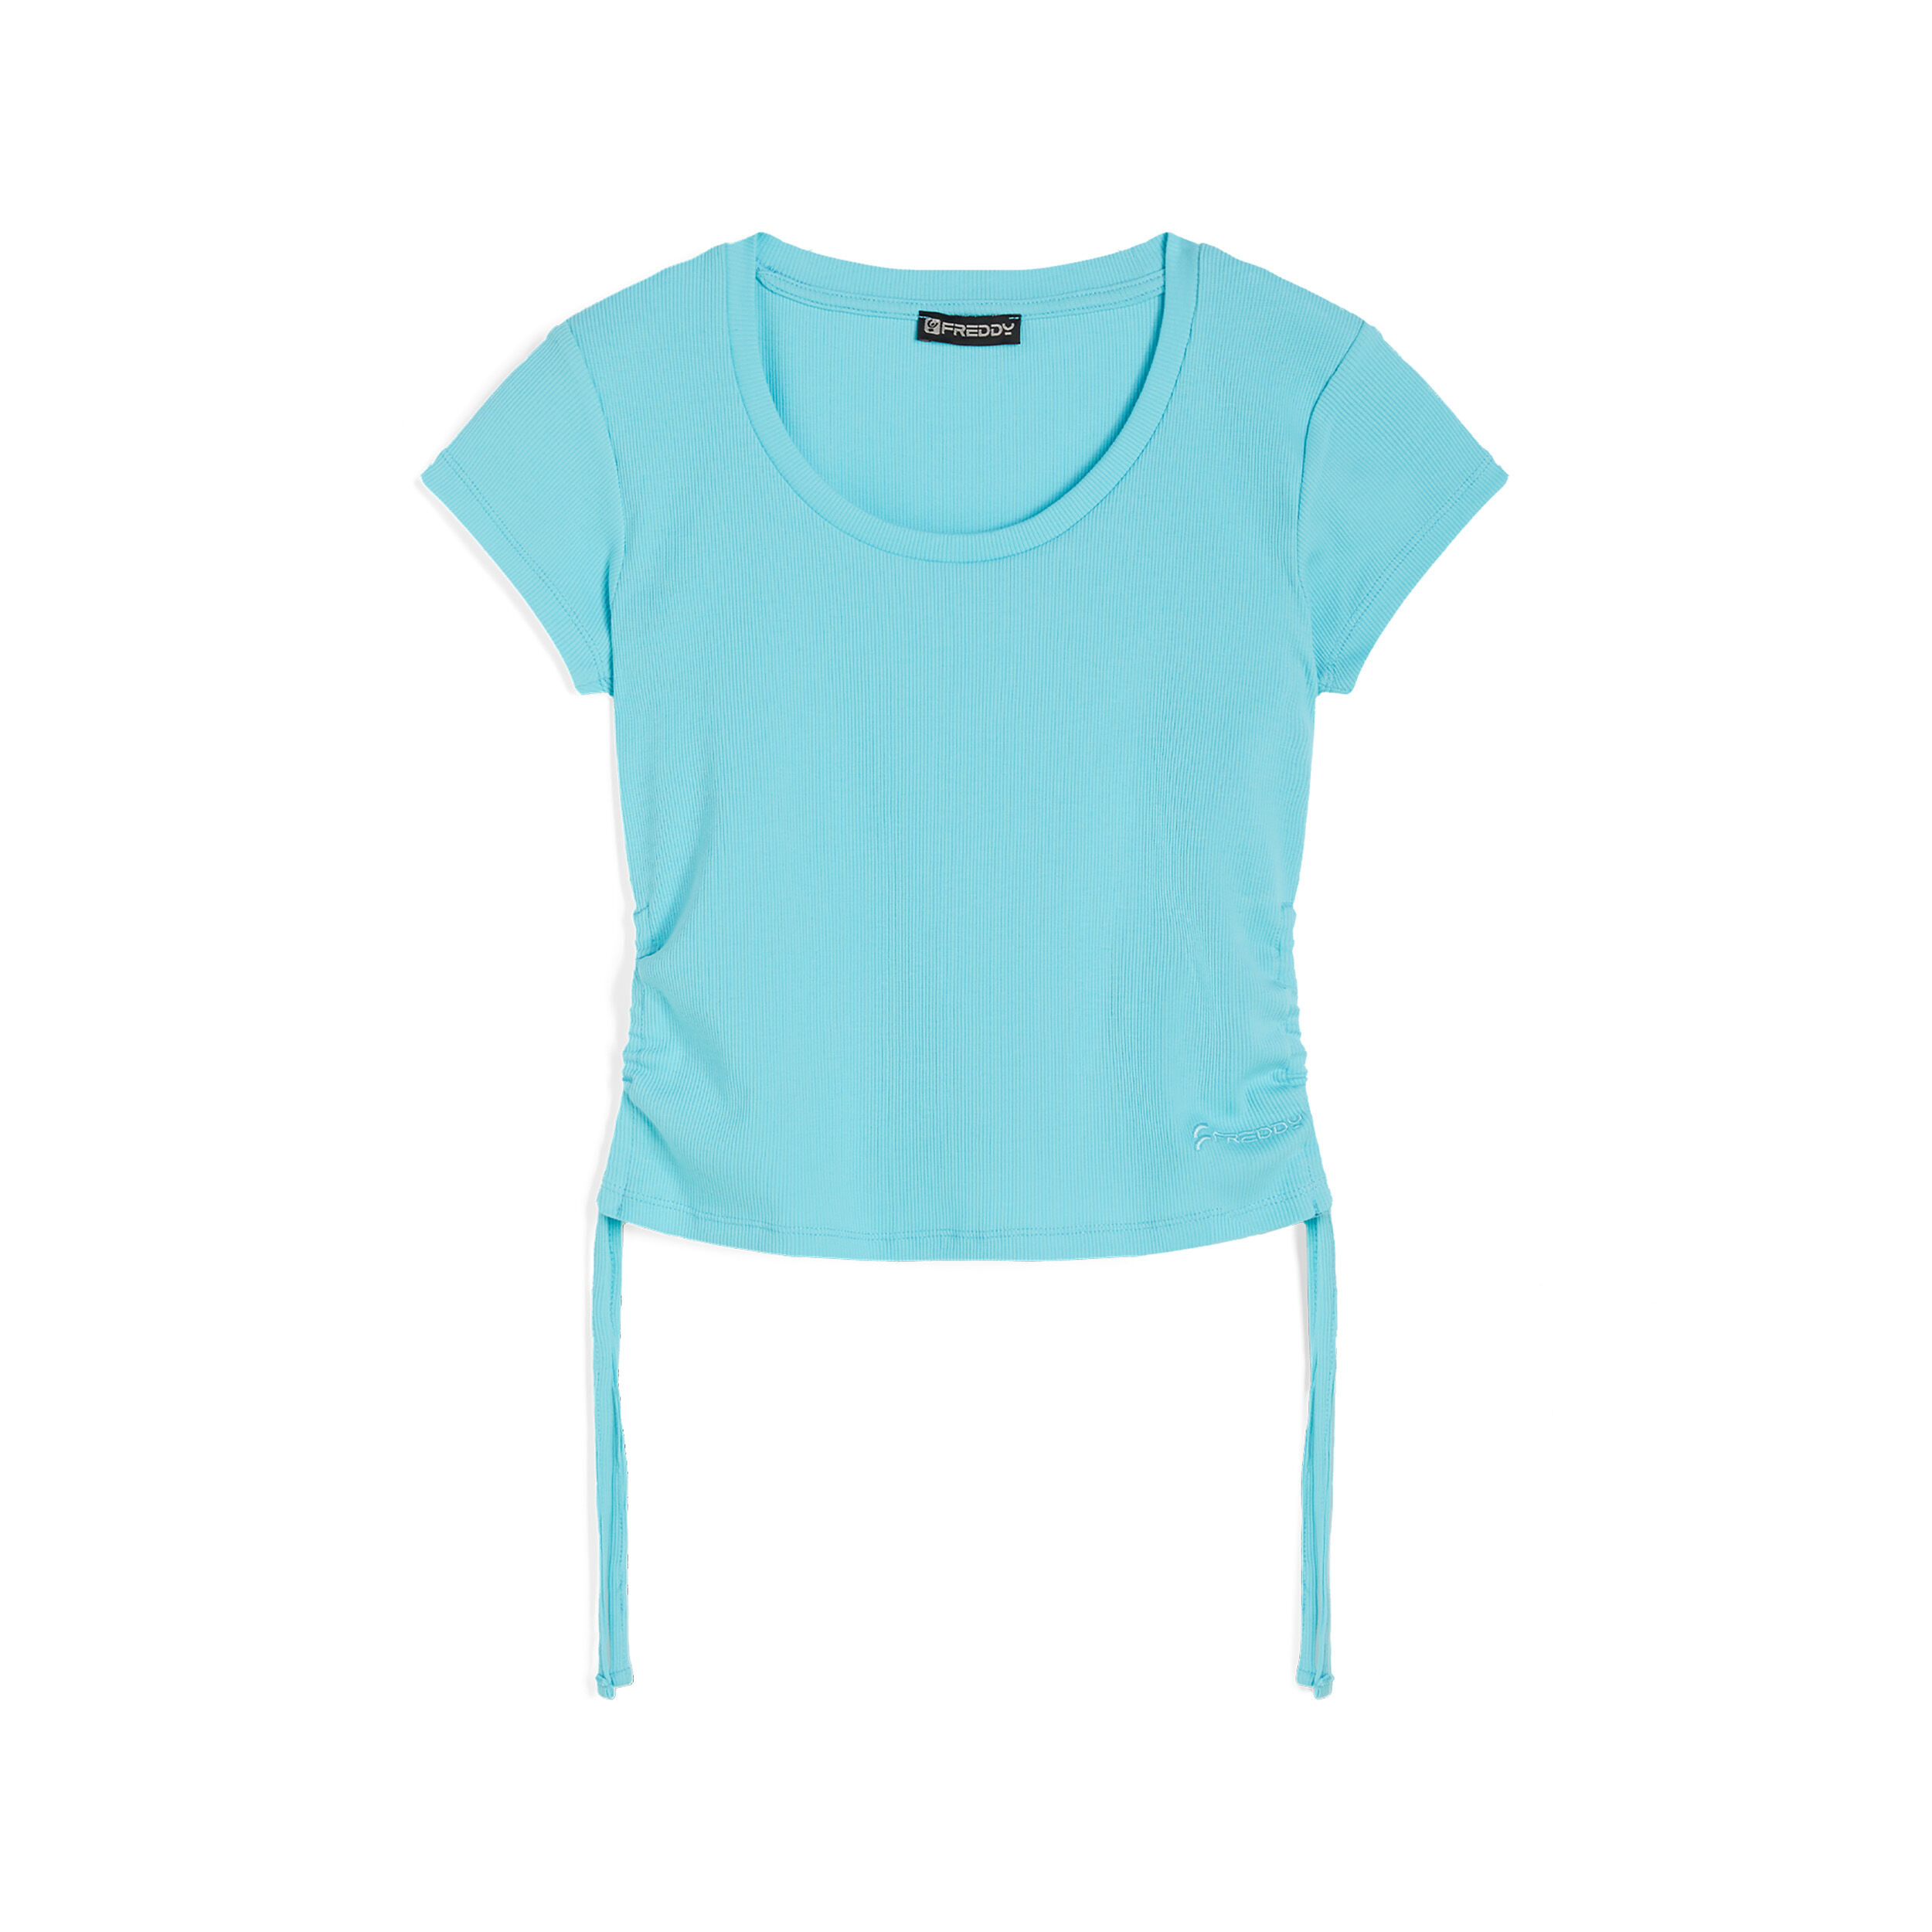 Freddy T-shirt donna slim fit in costina con laccetti sui fianchi Blue Radiance Donna Large